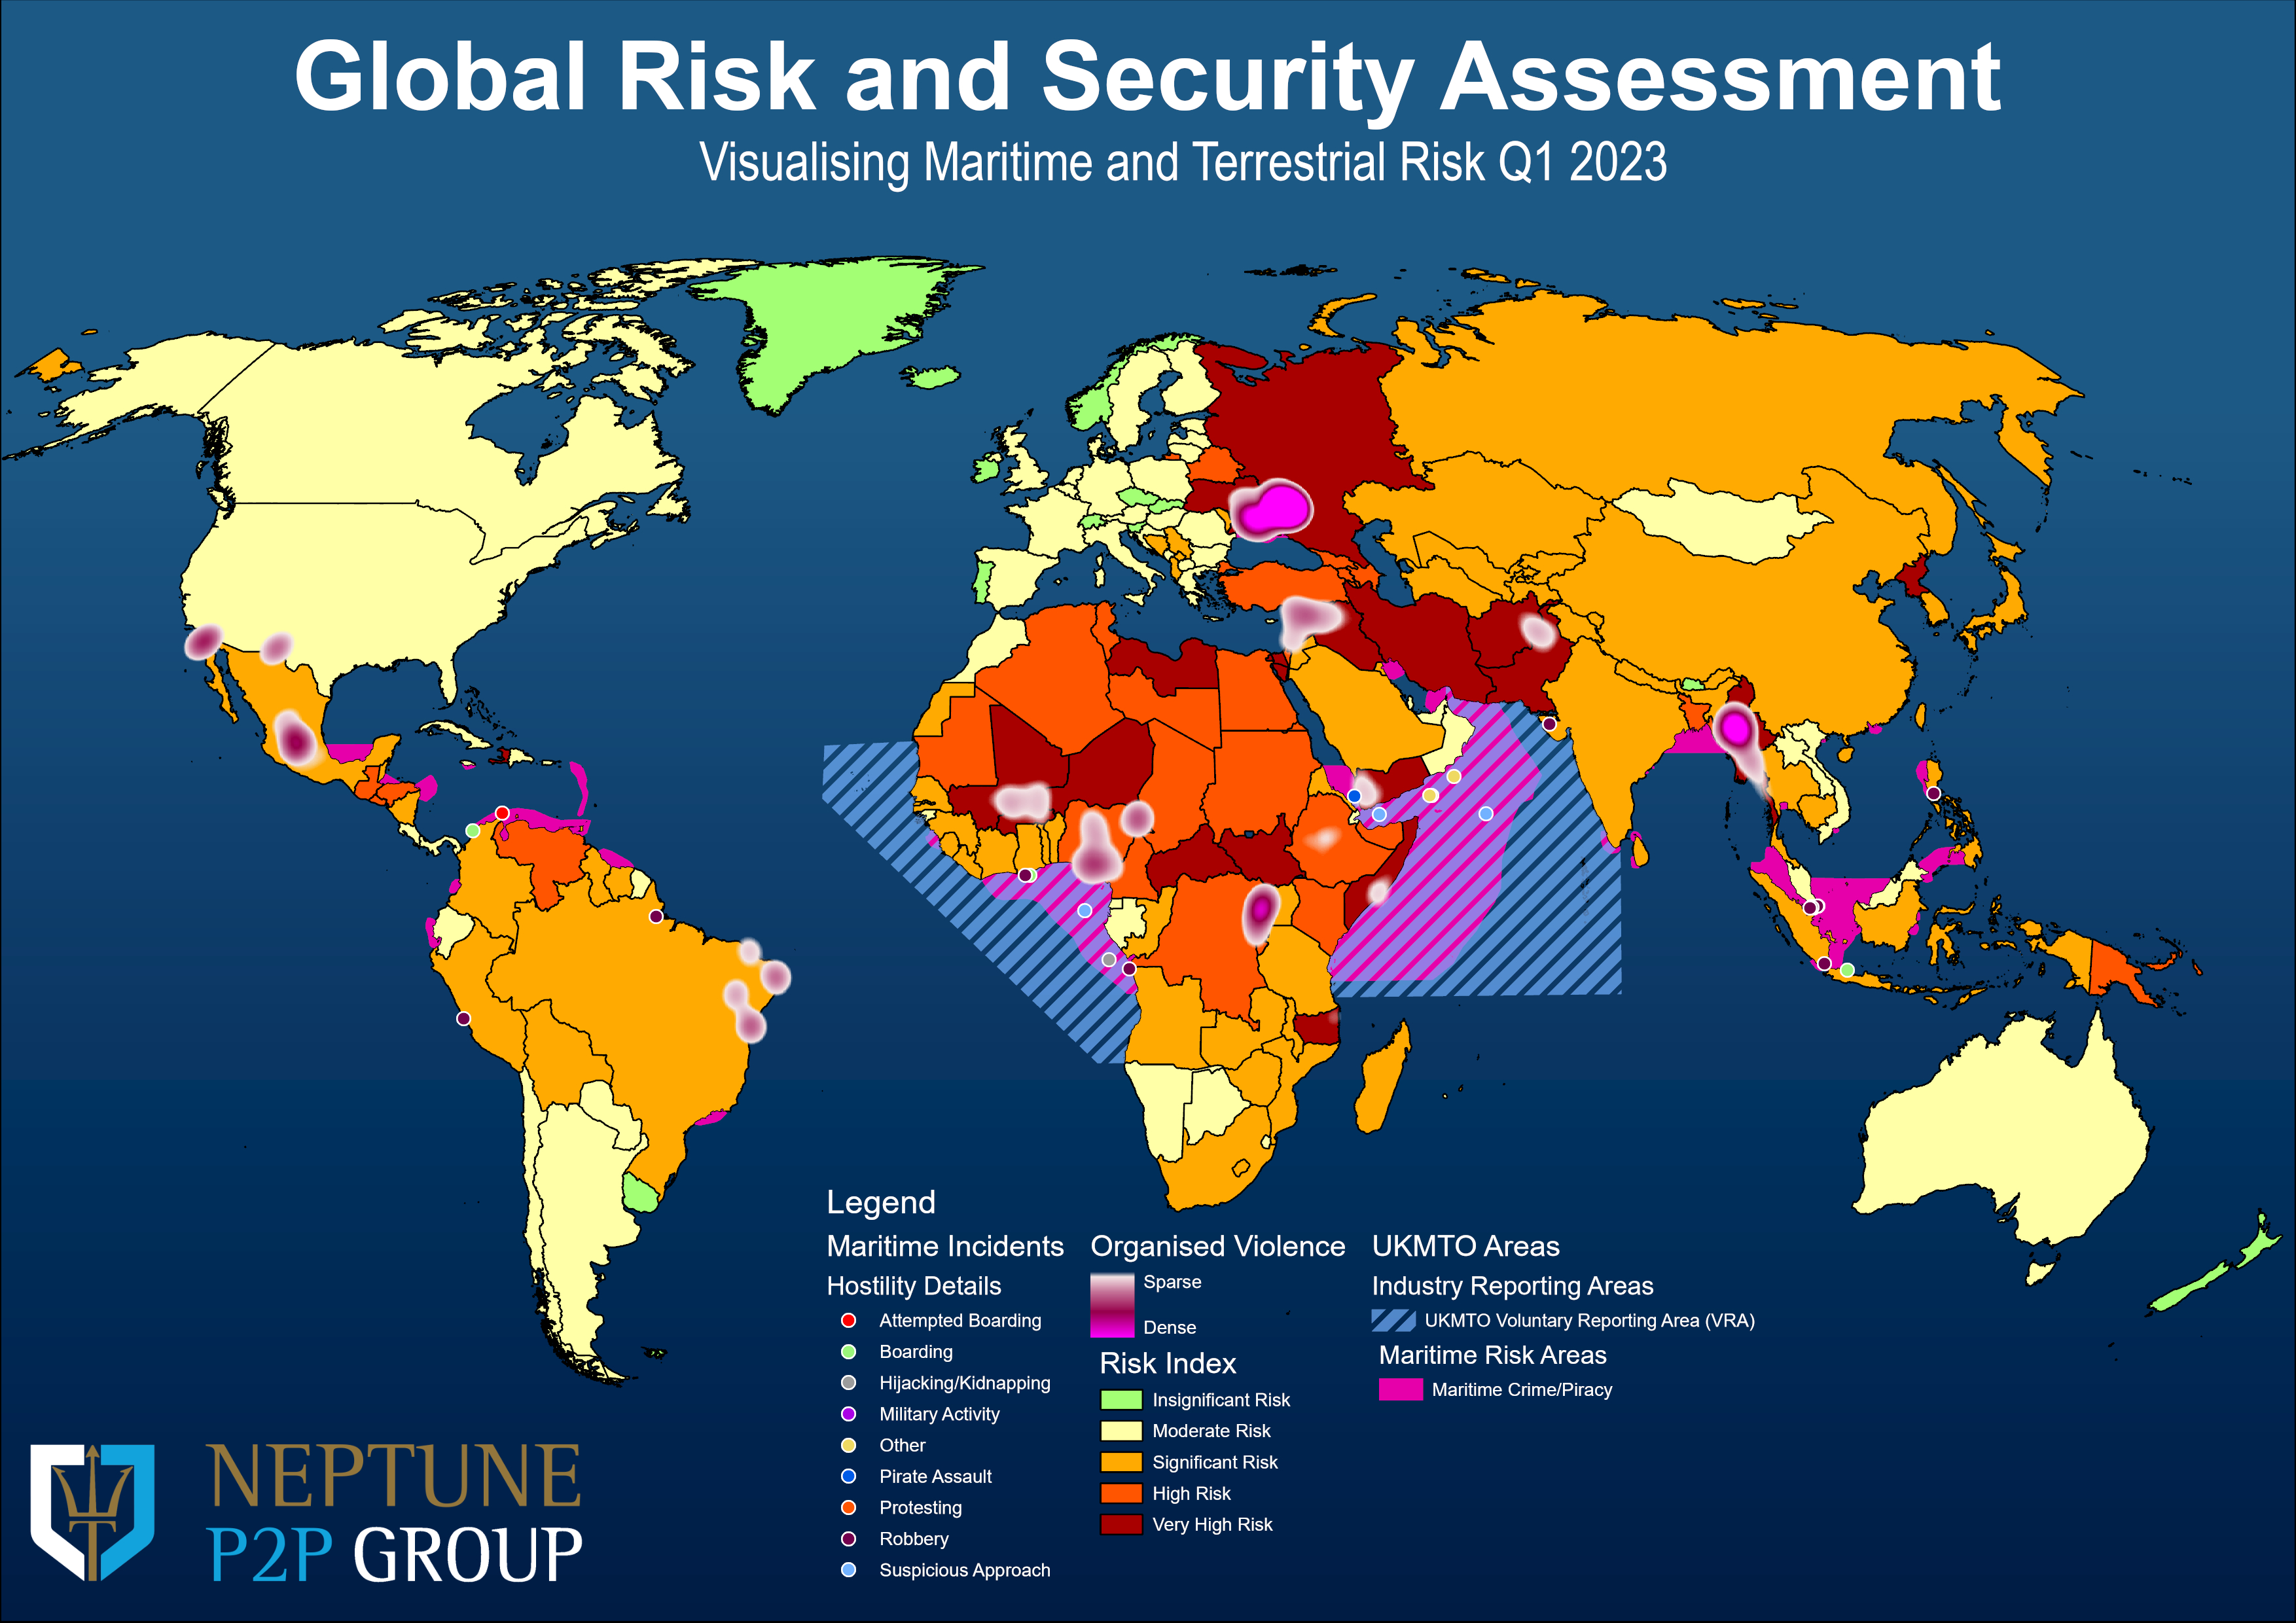 Neptune P2P Group - Global Security Risk Map Q1 2023